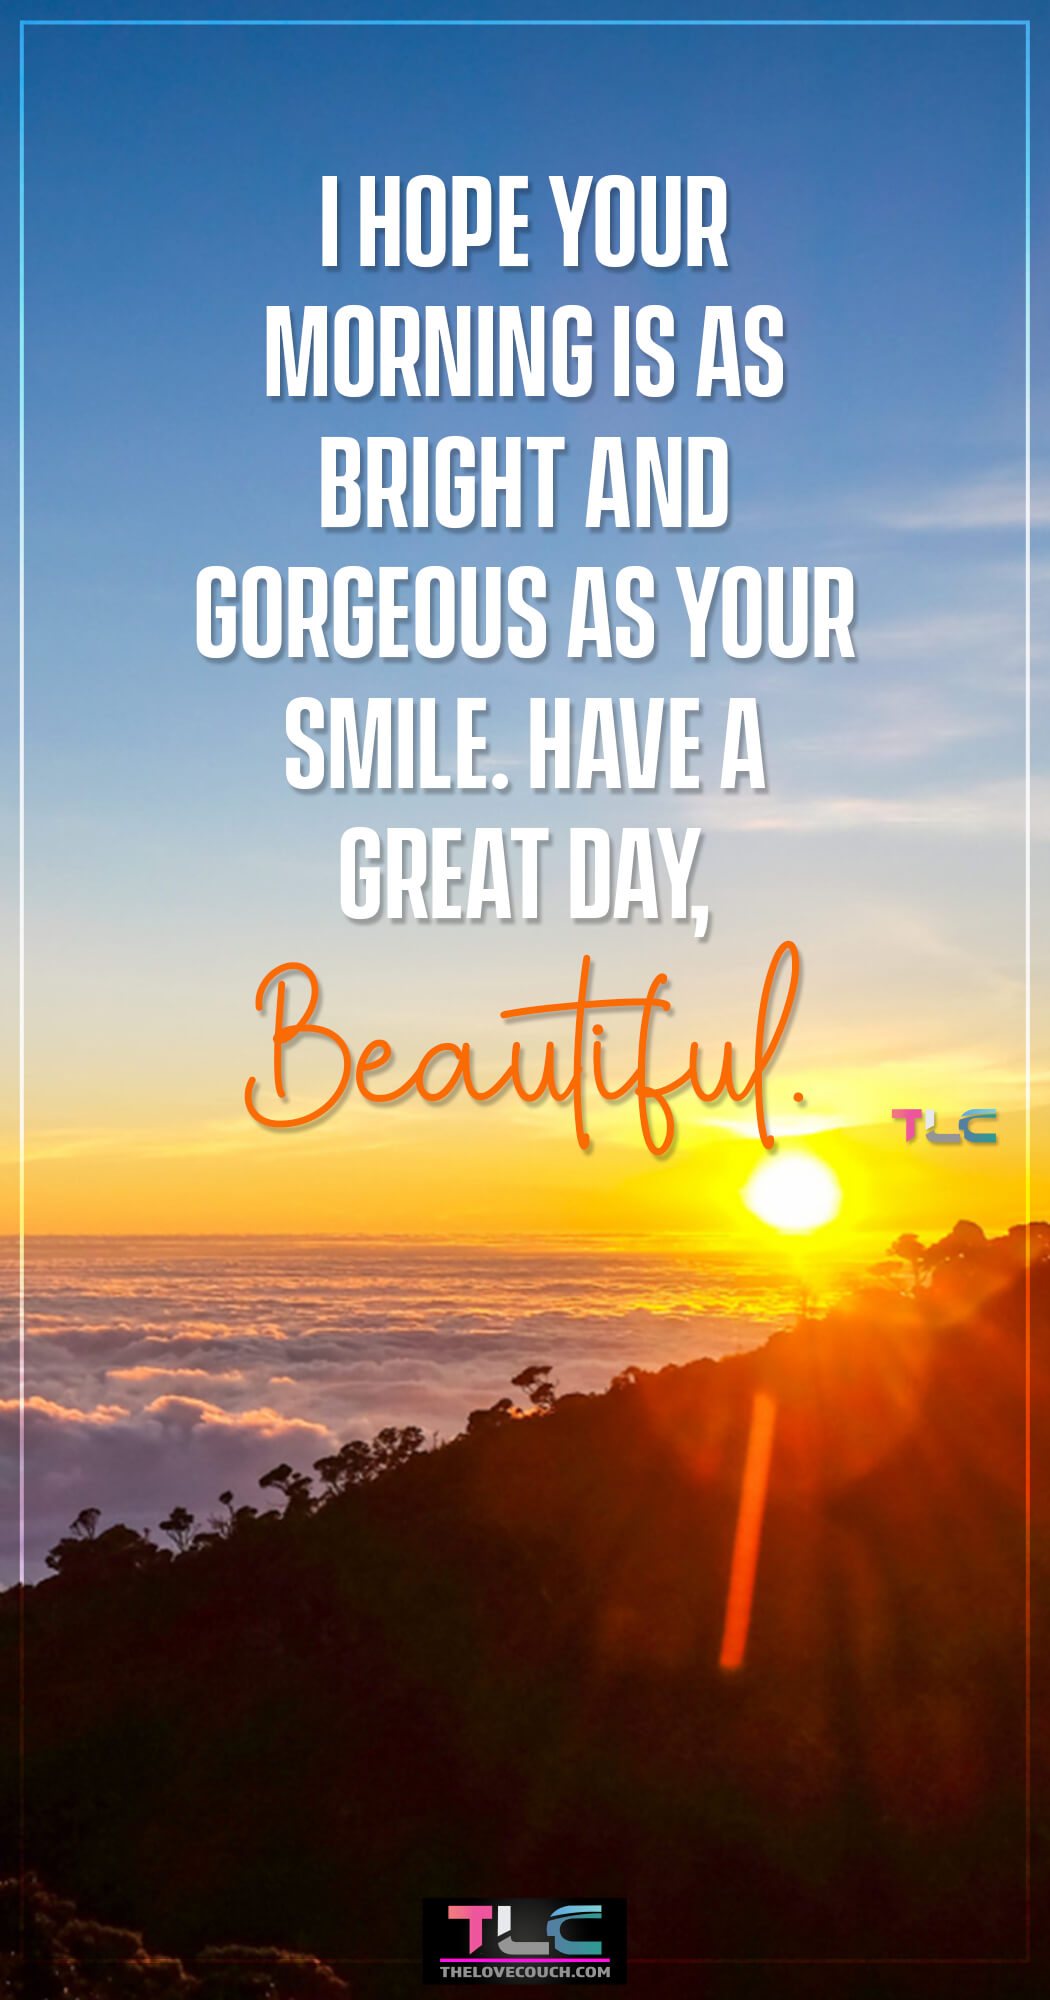 I hope your morning is as bright and gorgeous as your smile. Have a great day, beautiful!